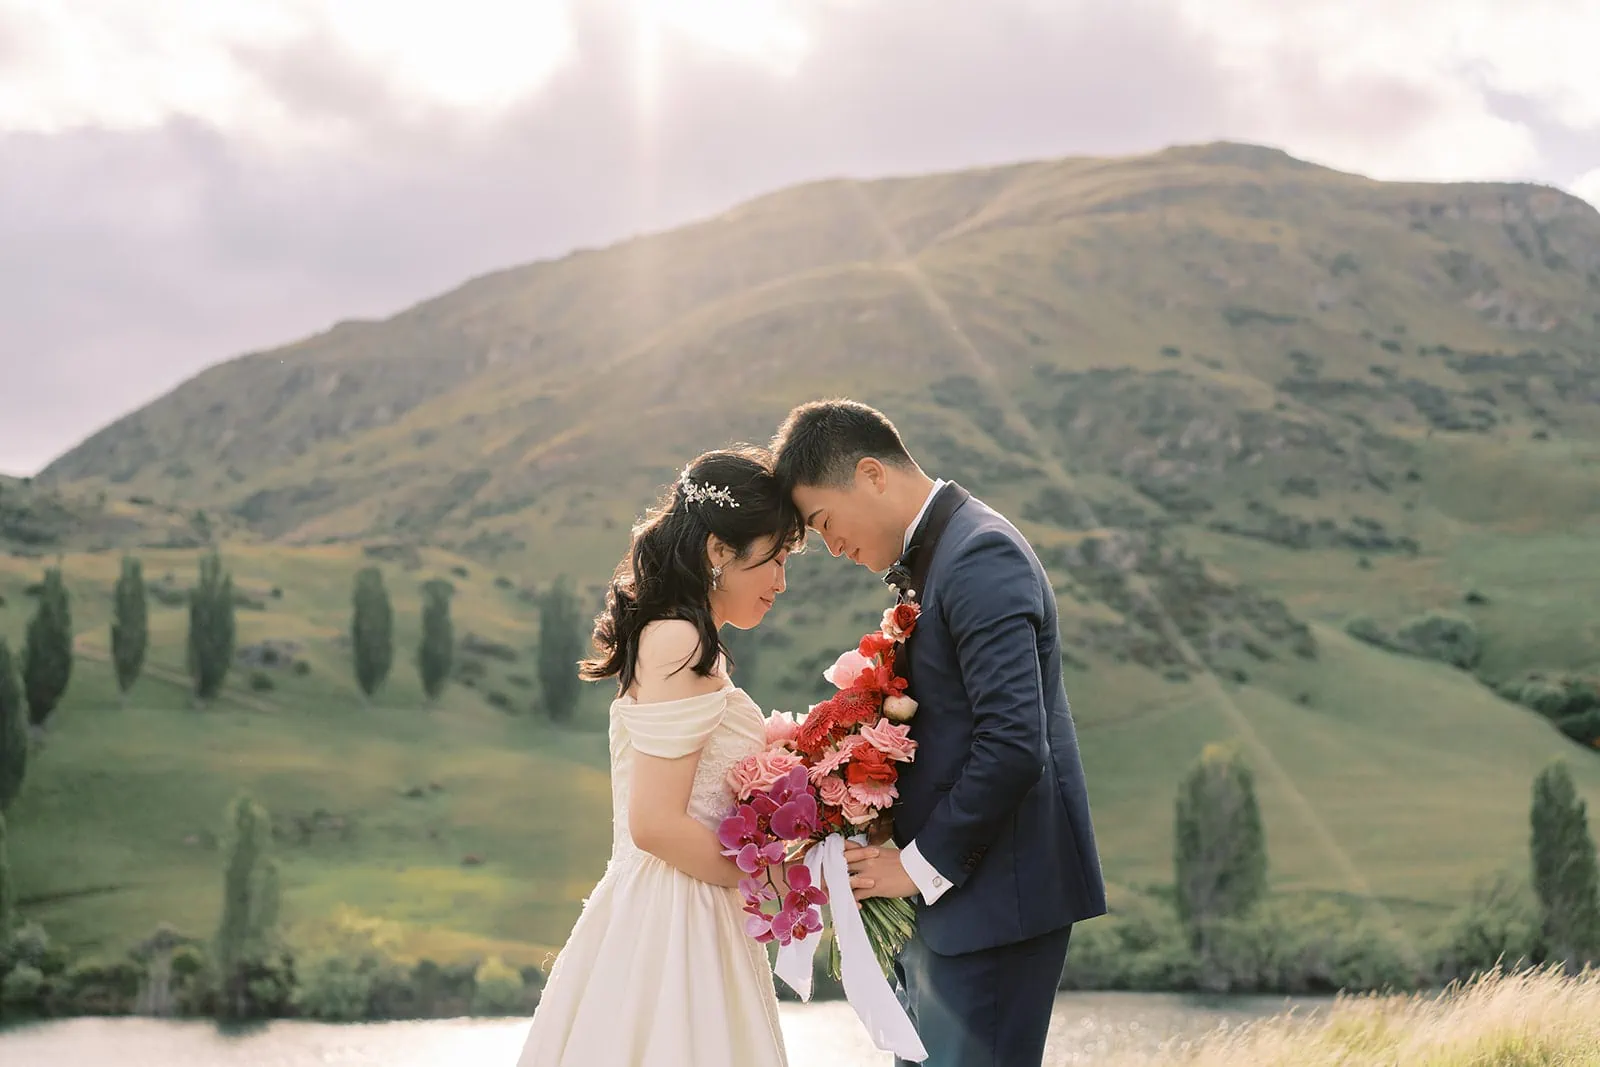 Queenstown Elopement Heli Wedding Photographer クイーンズタウン結婚式 | A picturesque pre-wedding photoshoot captures a bride and groom exquisitely posed in front of a serene lake framed by majestic mountains.